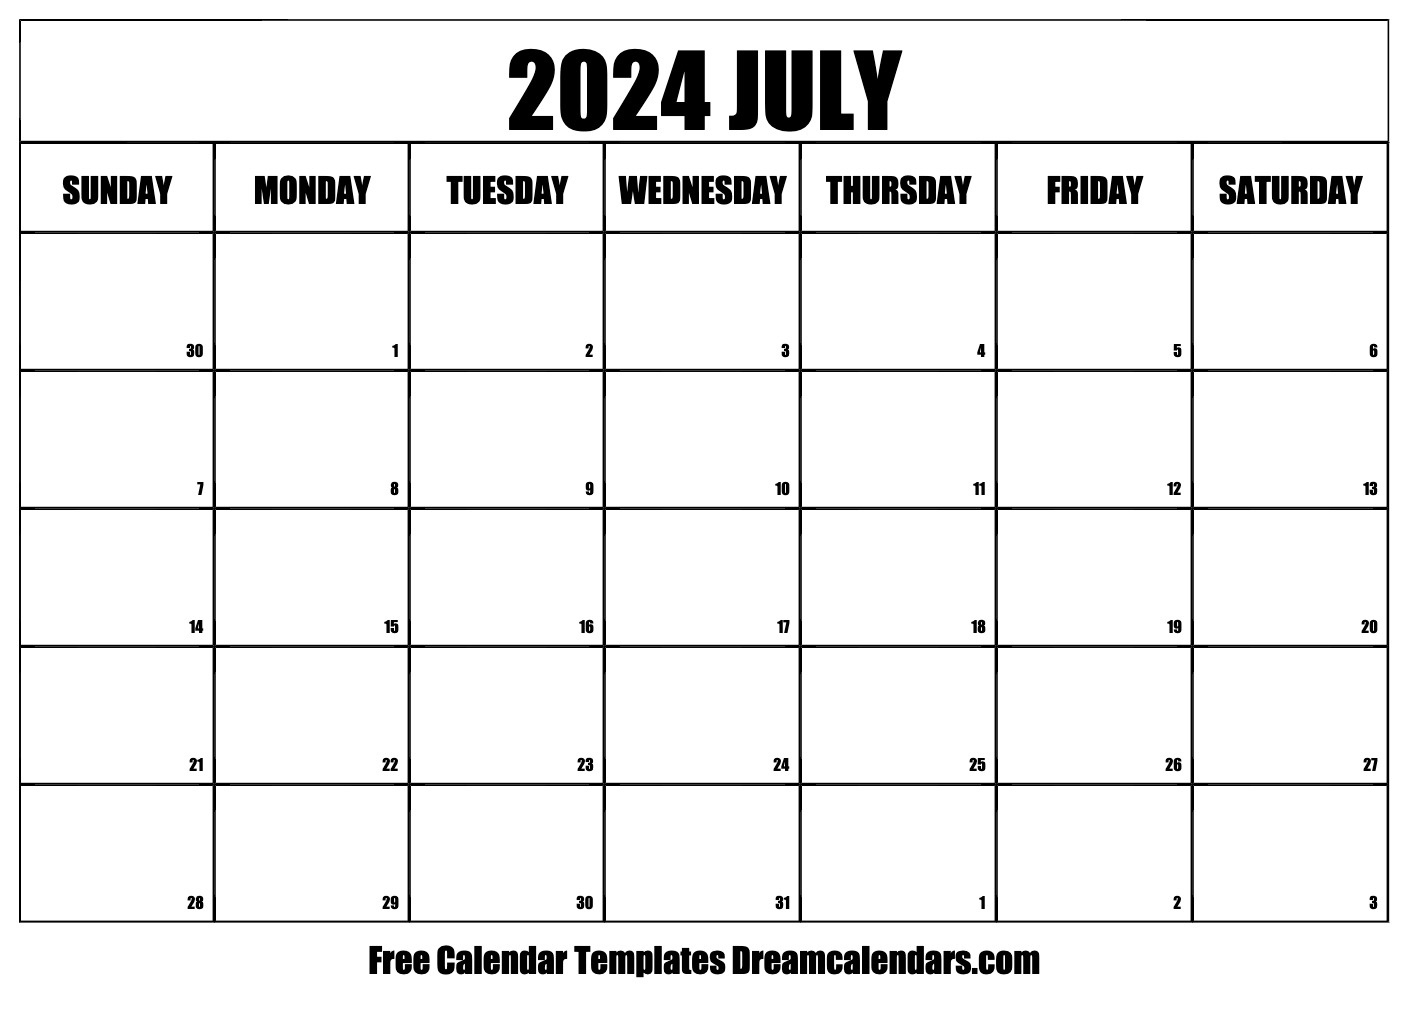 July 2024 Calendar - Free Printable With Holidays And Observances throughout July Saints Calendar 2024